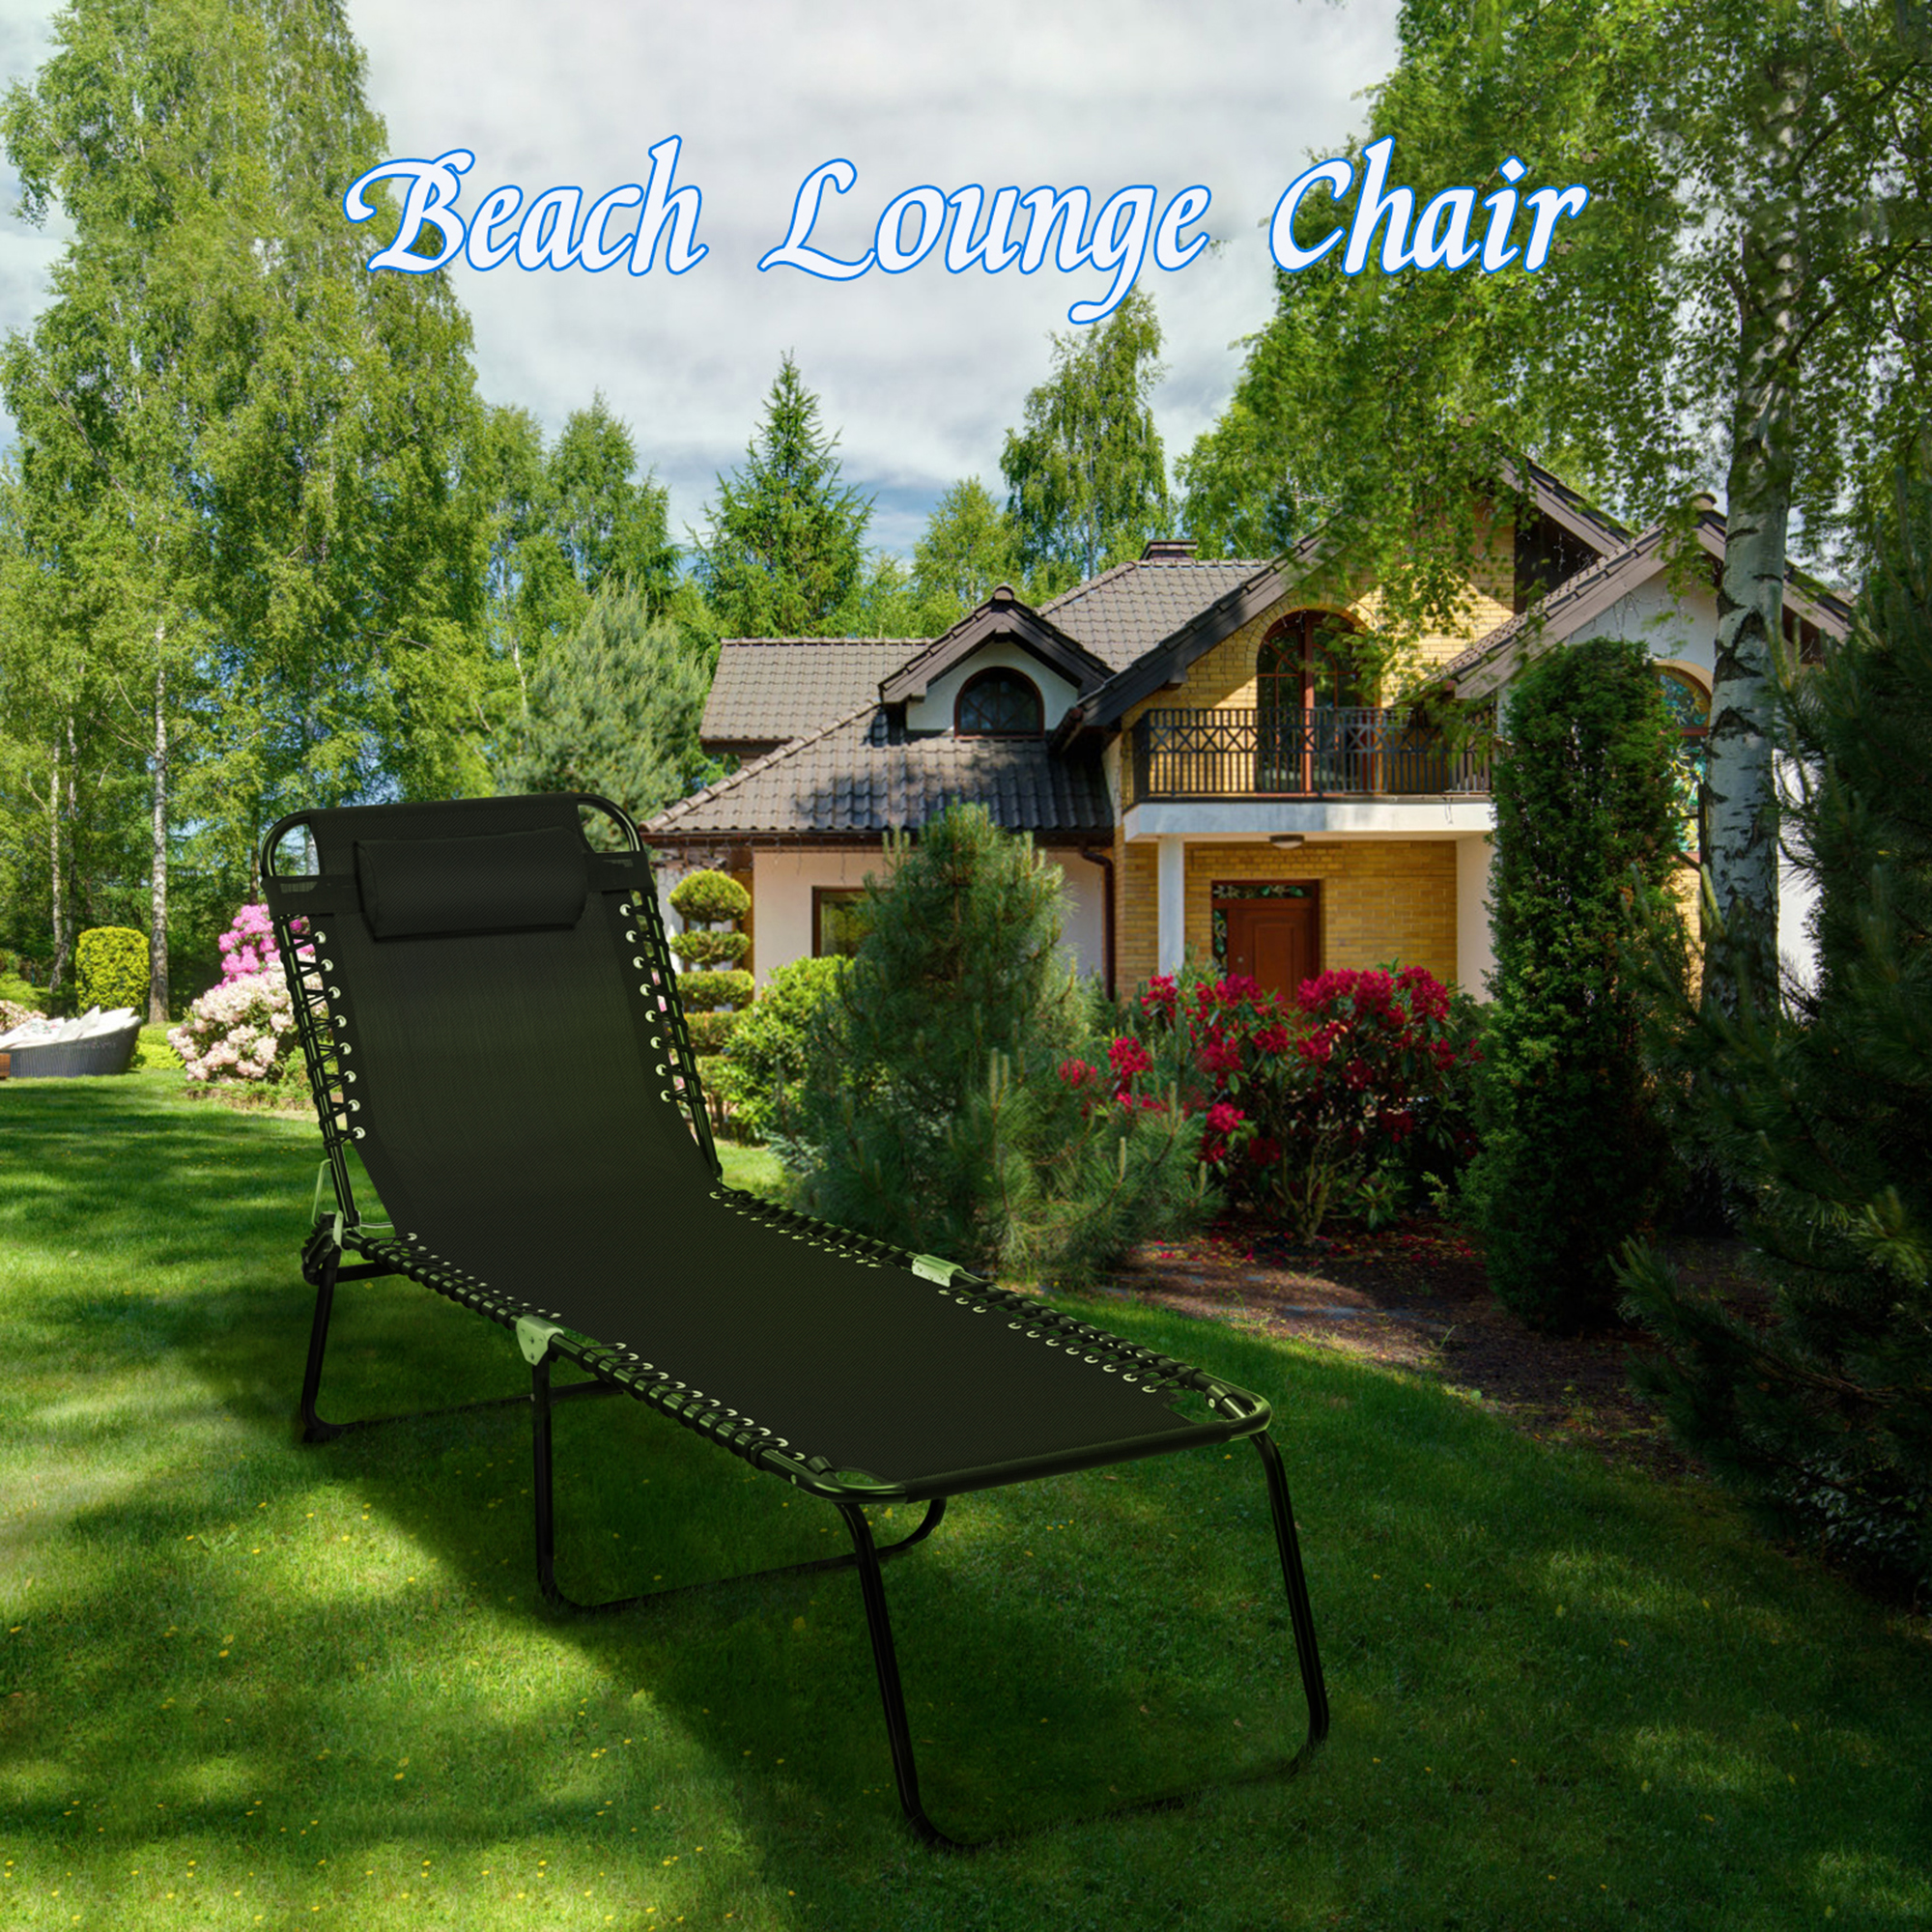 Gymax Folding Beach Lounger Chaise Lounge Chair w/ Pillow 4-Level Backrest Black - image 3 of 10